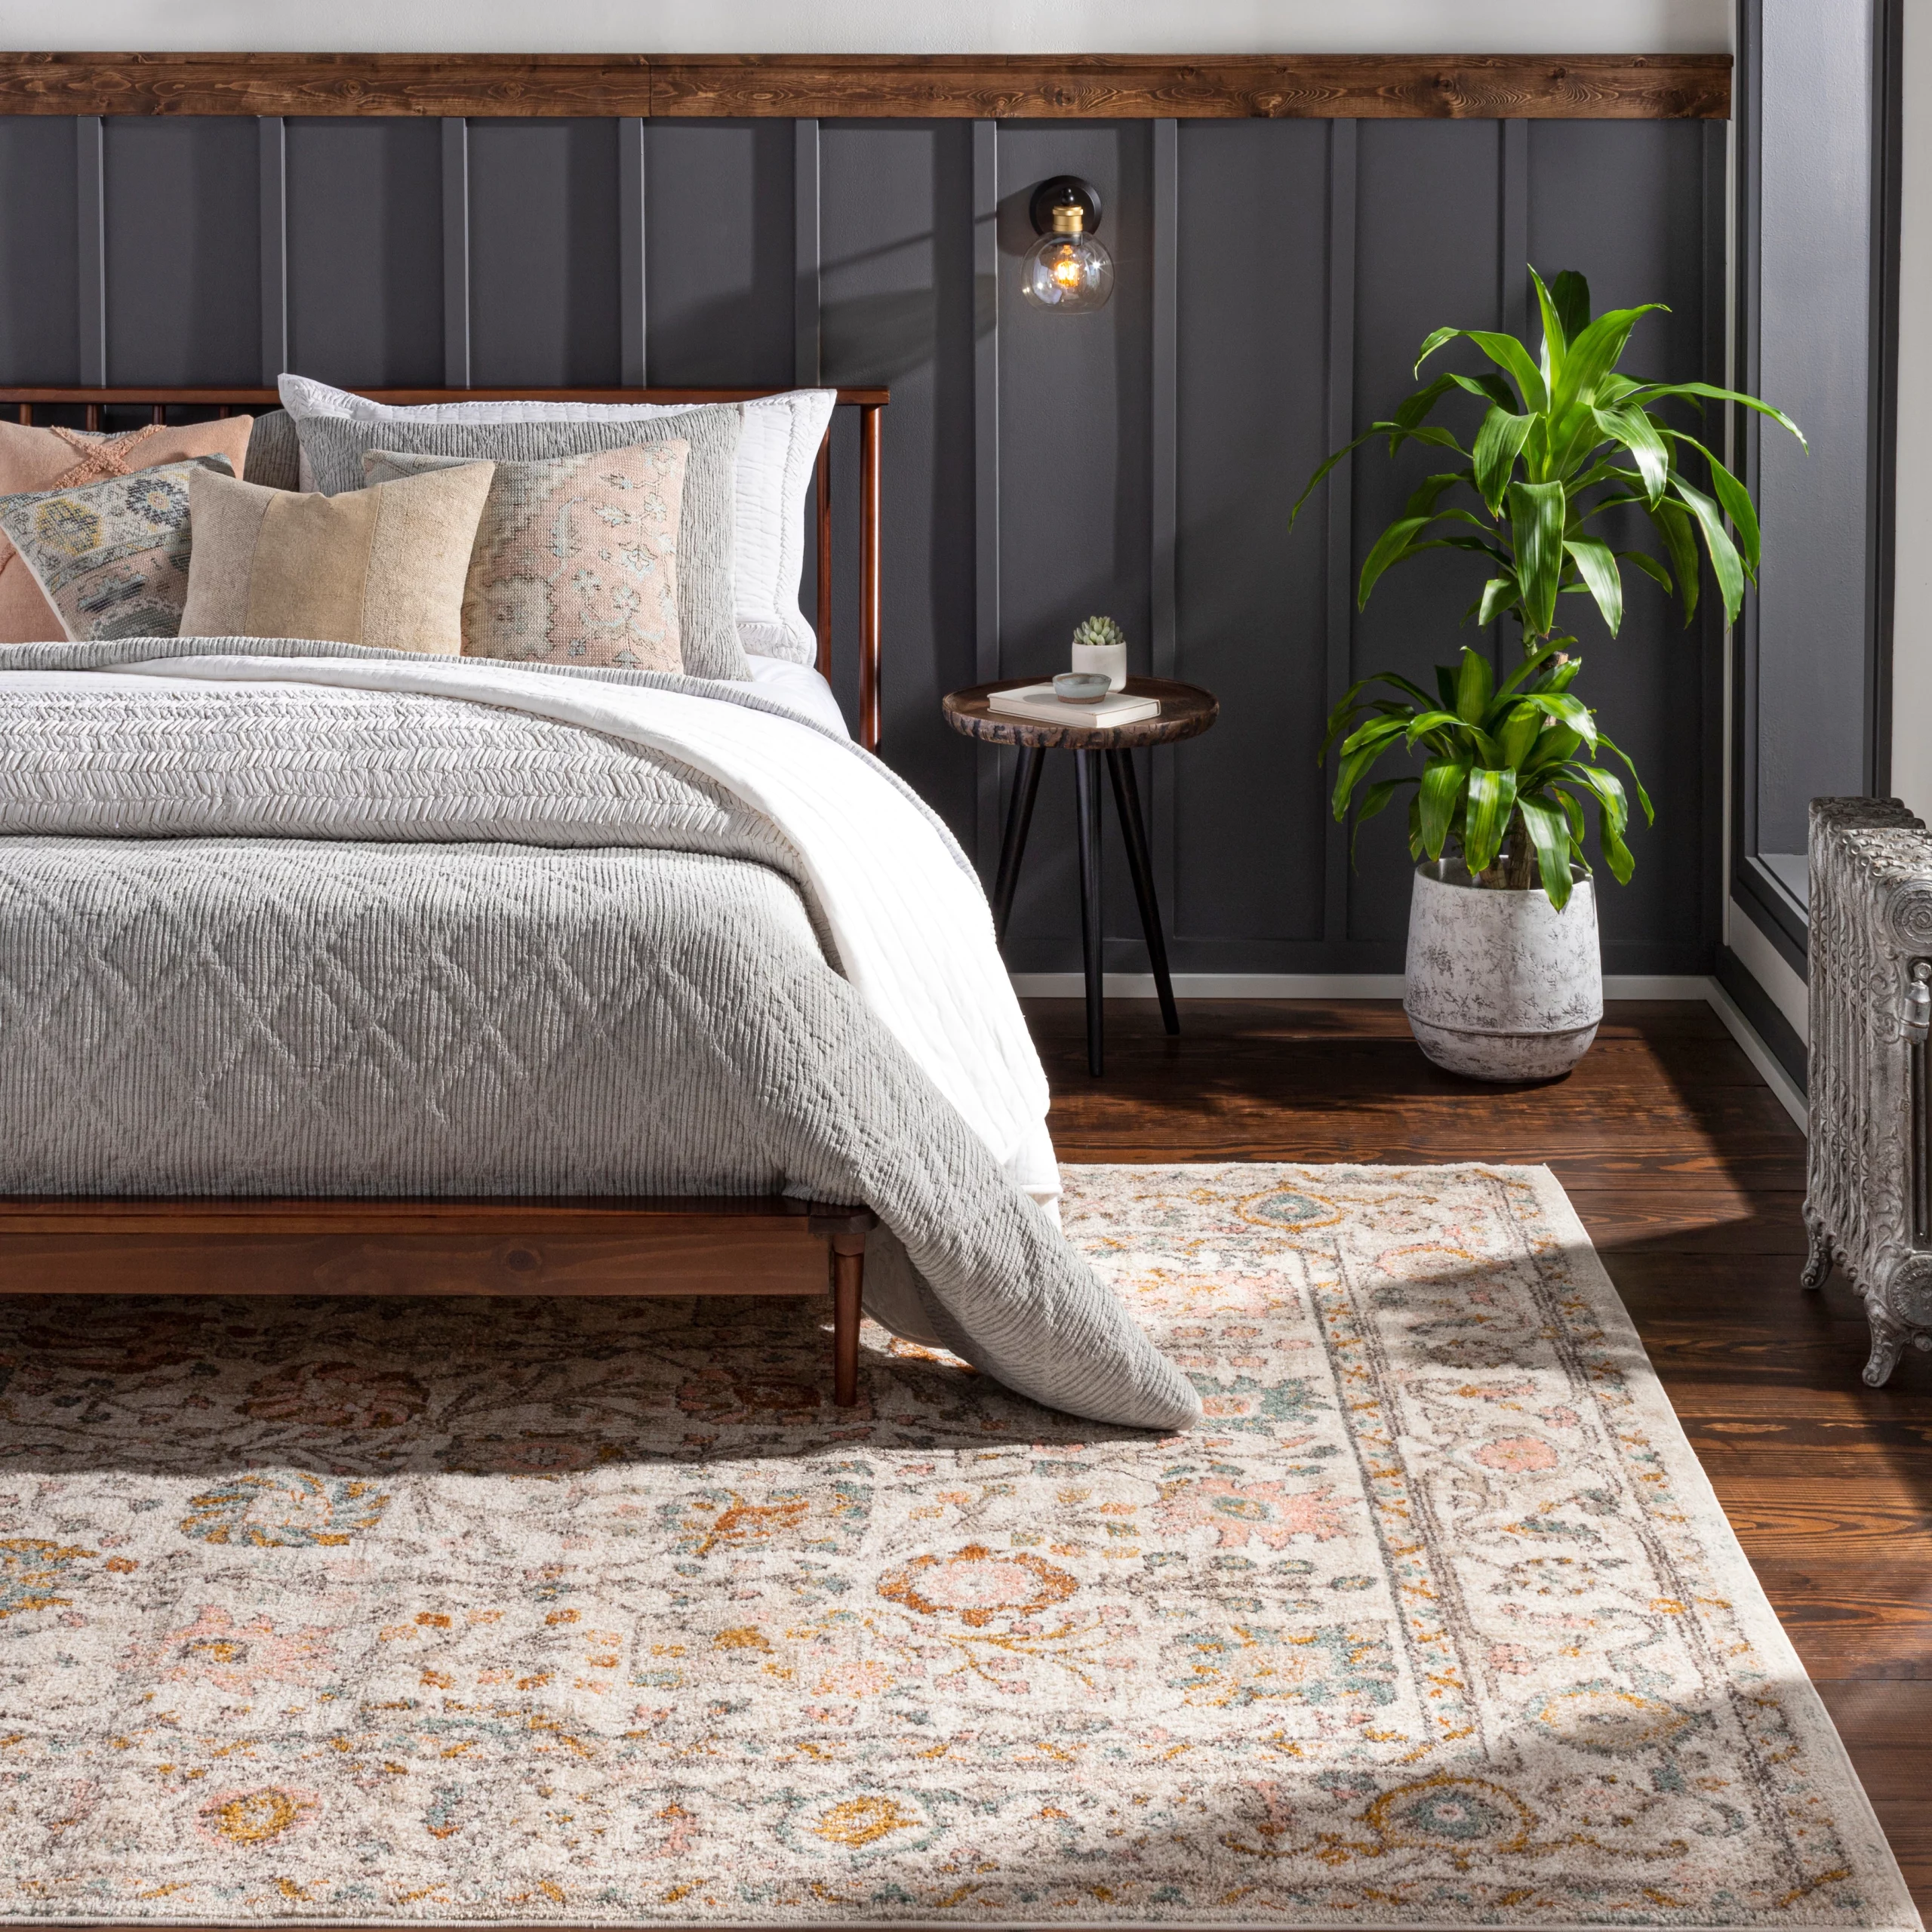 Soften Your Room with a Muted Floral